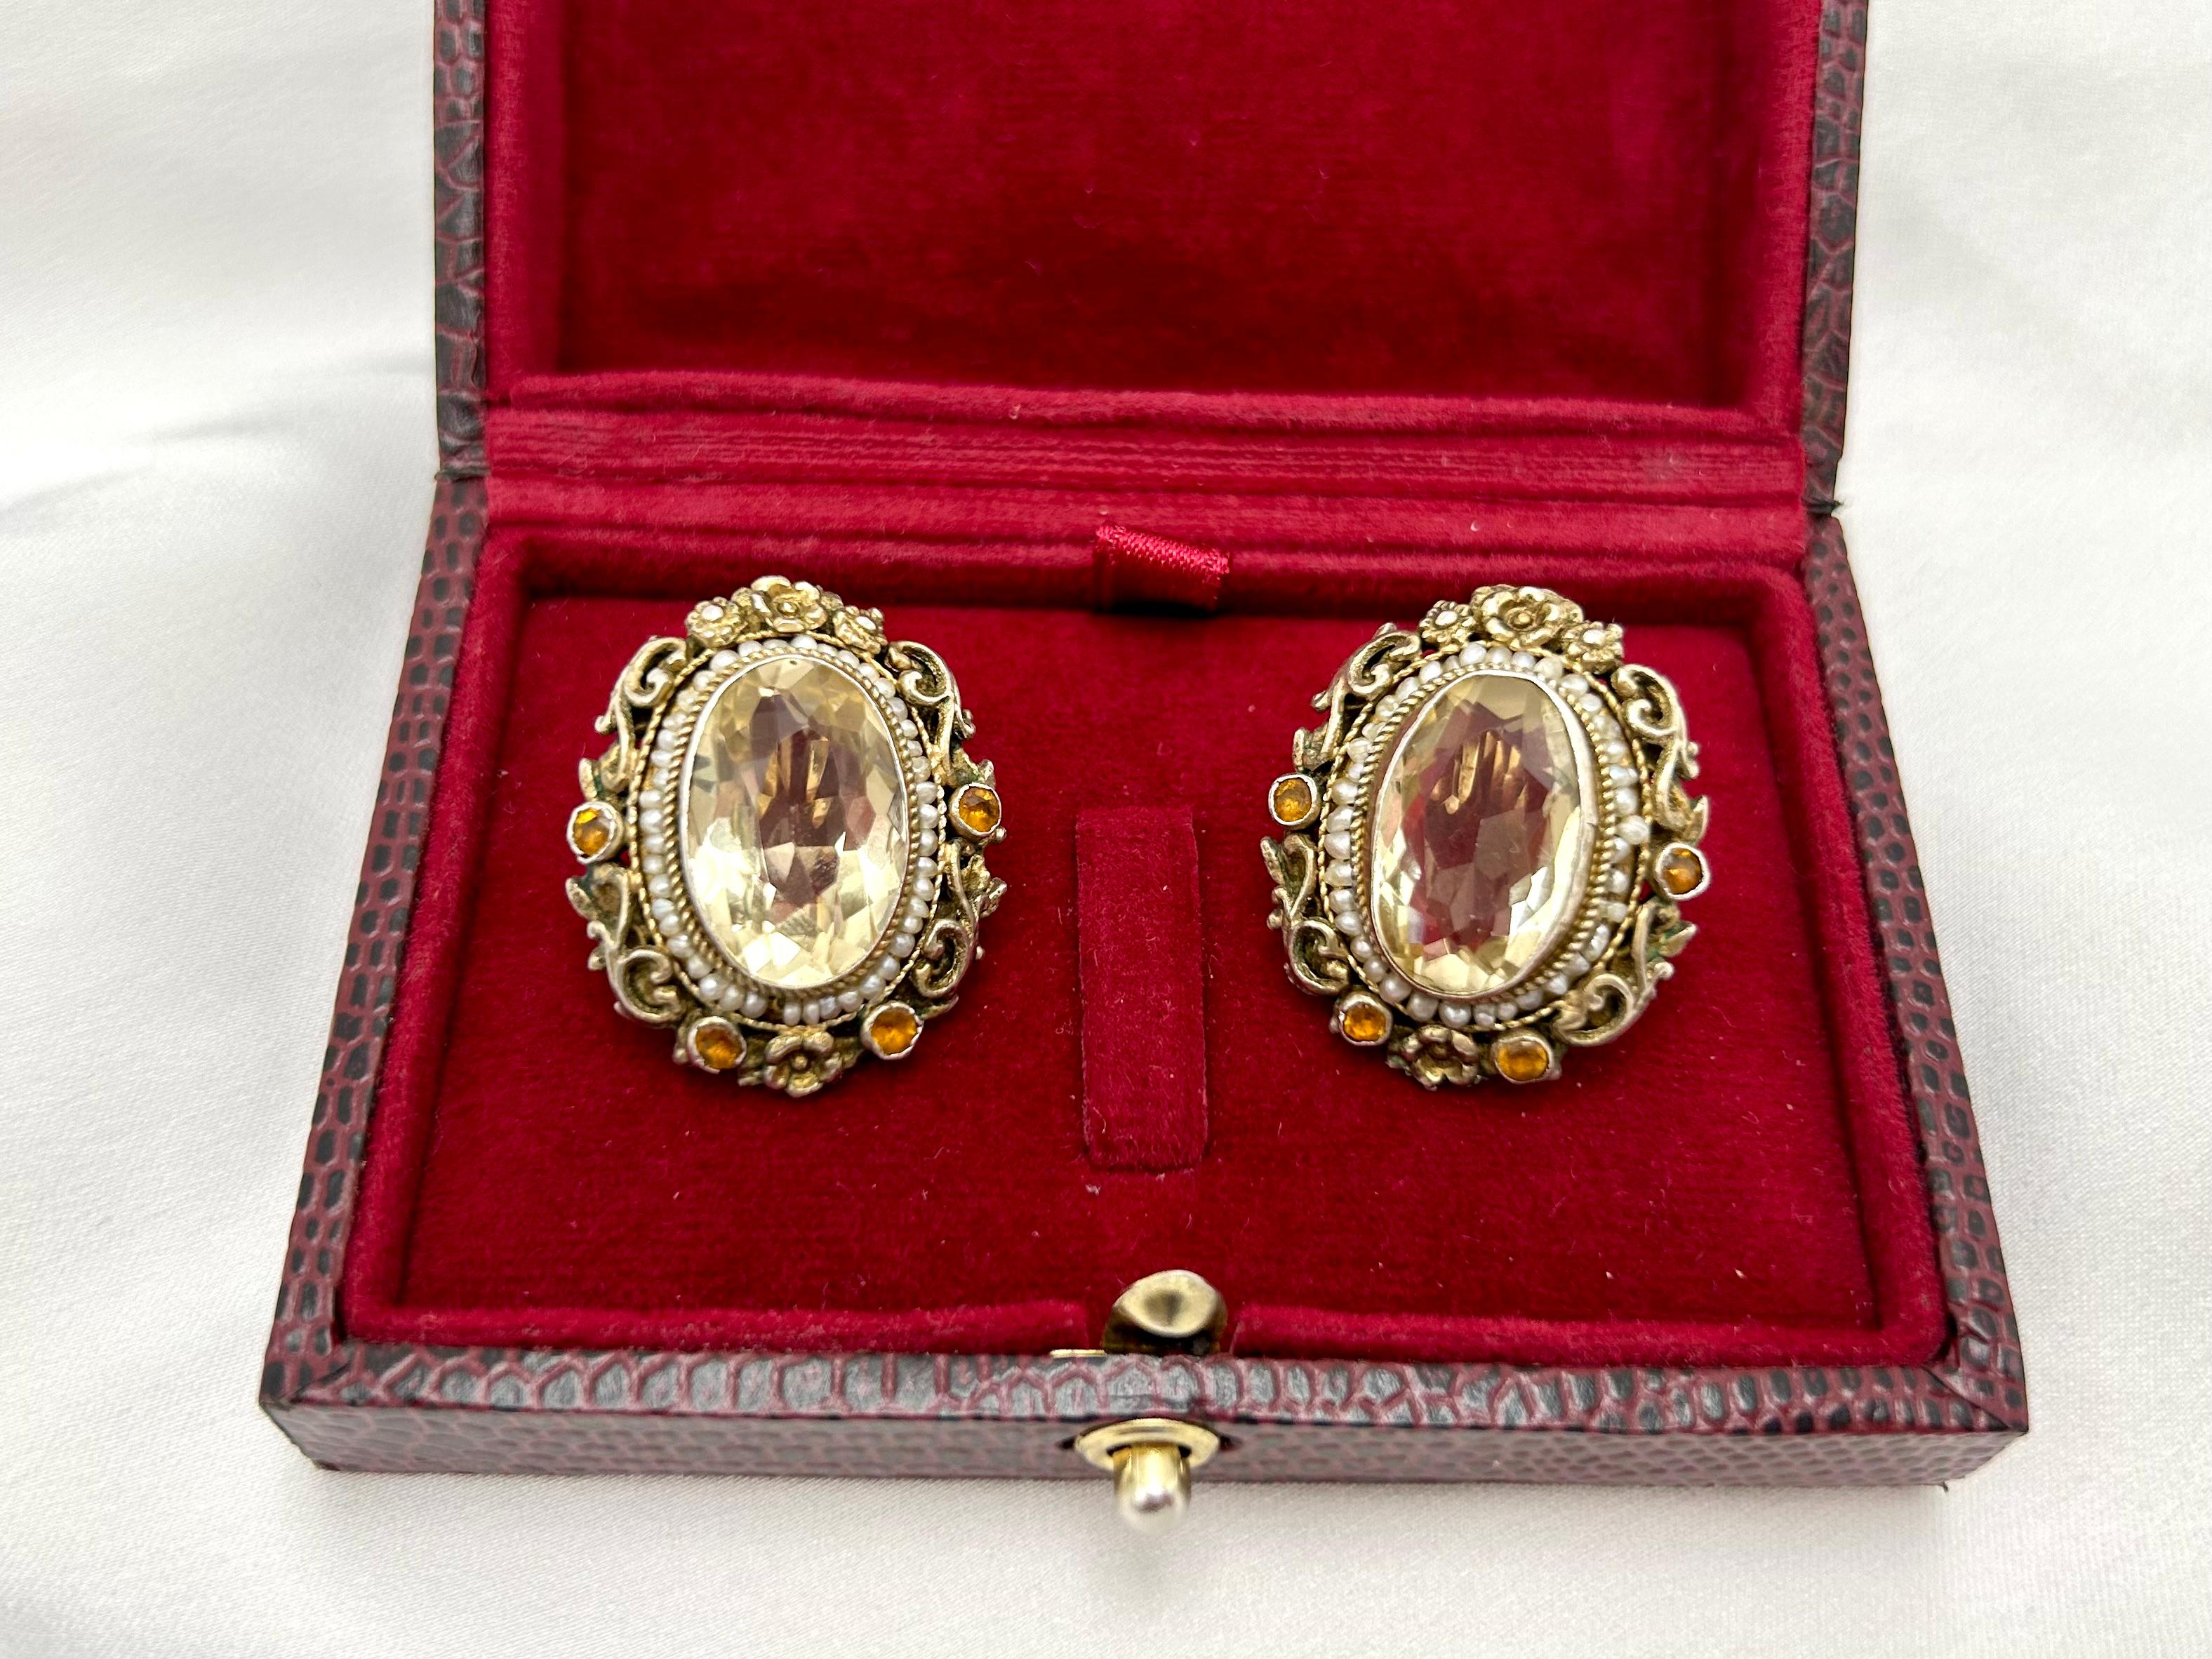 Victorian Antique silver earrings with citrines, garnets and pearls, circa 1900. For Sale